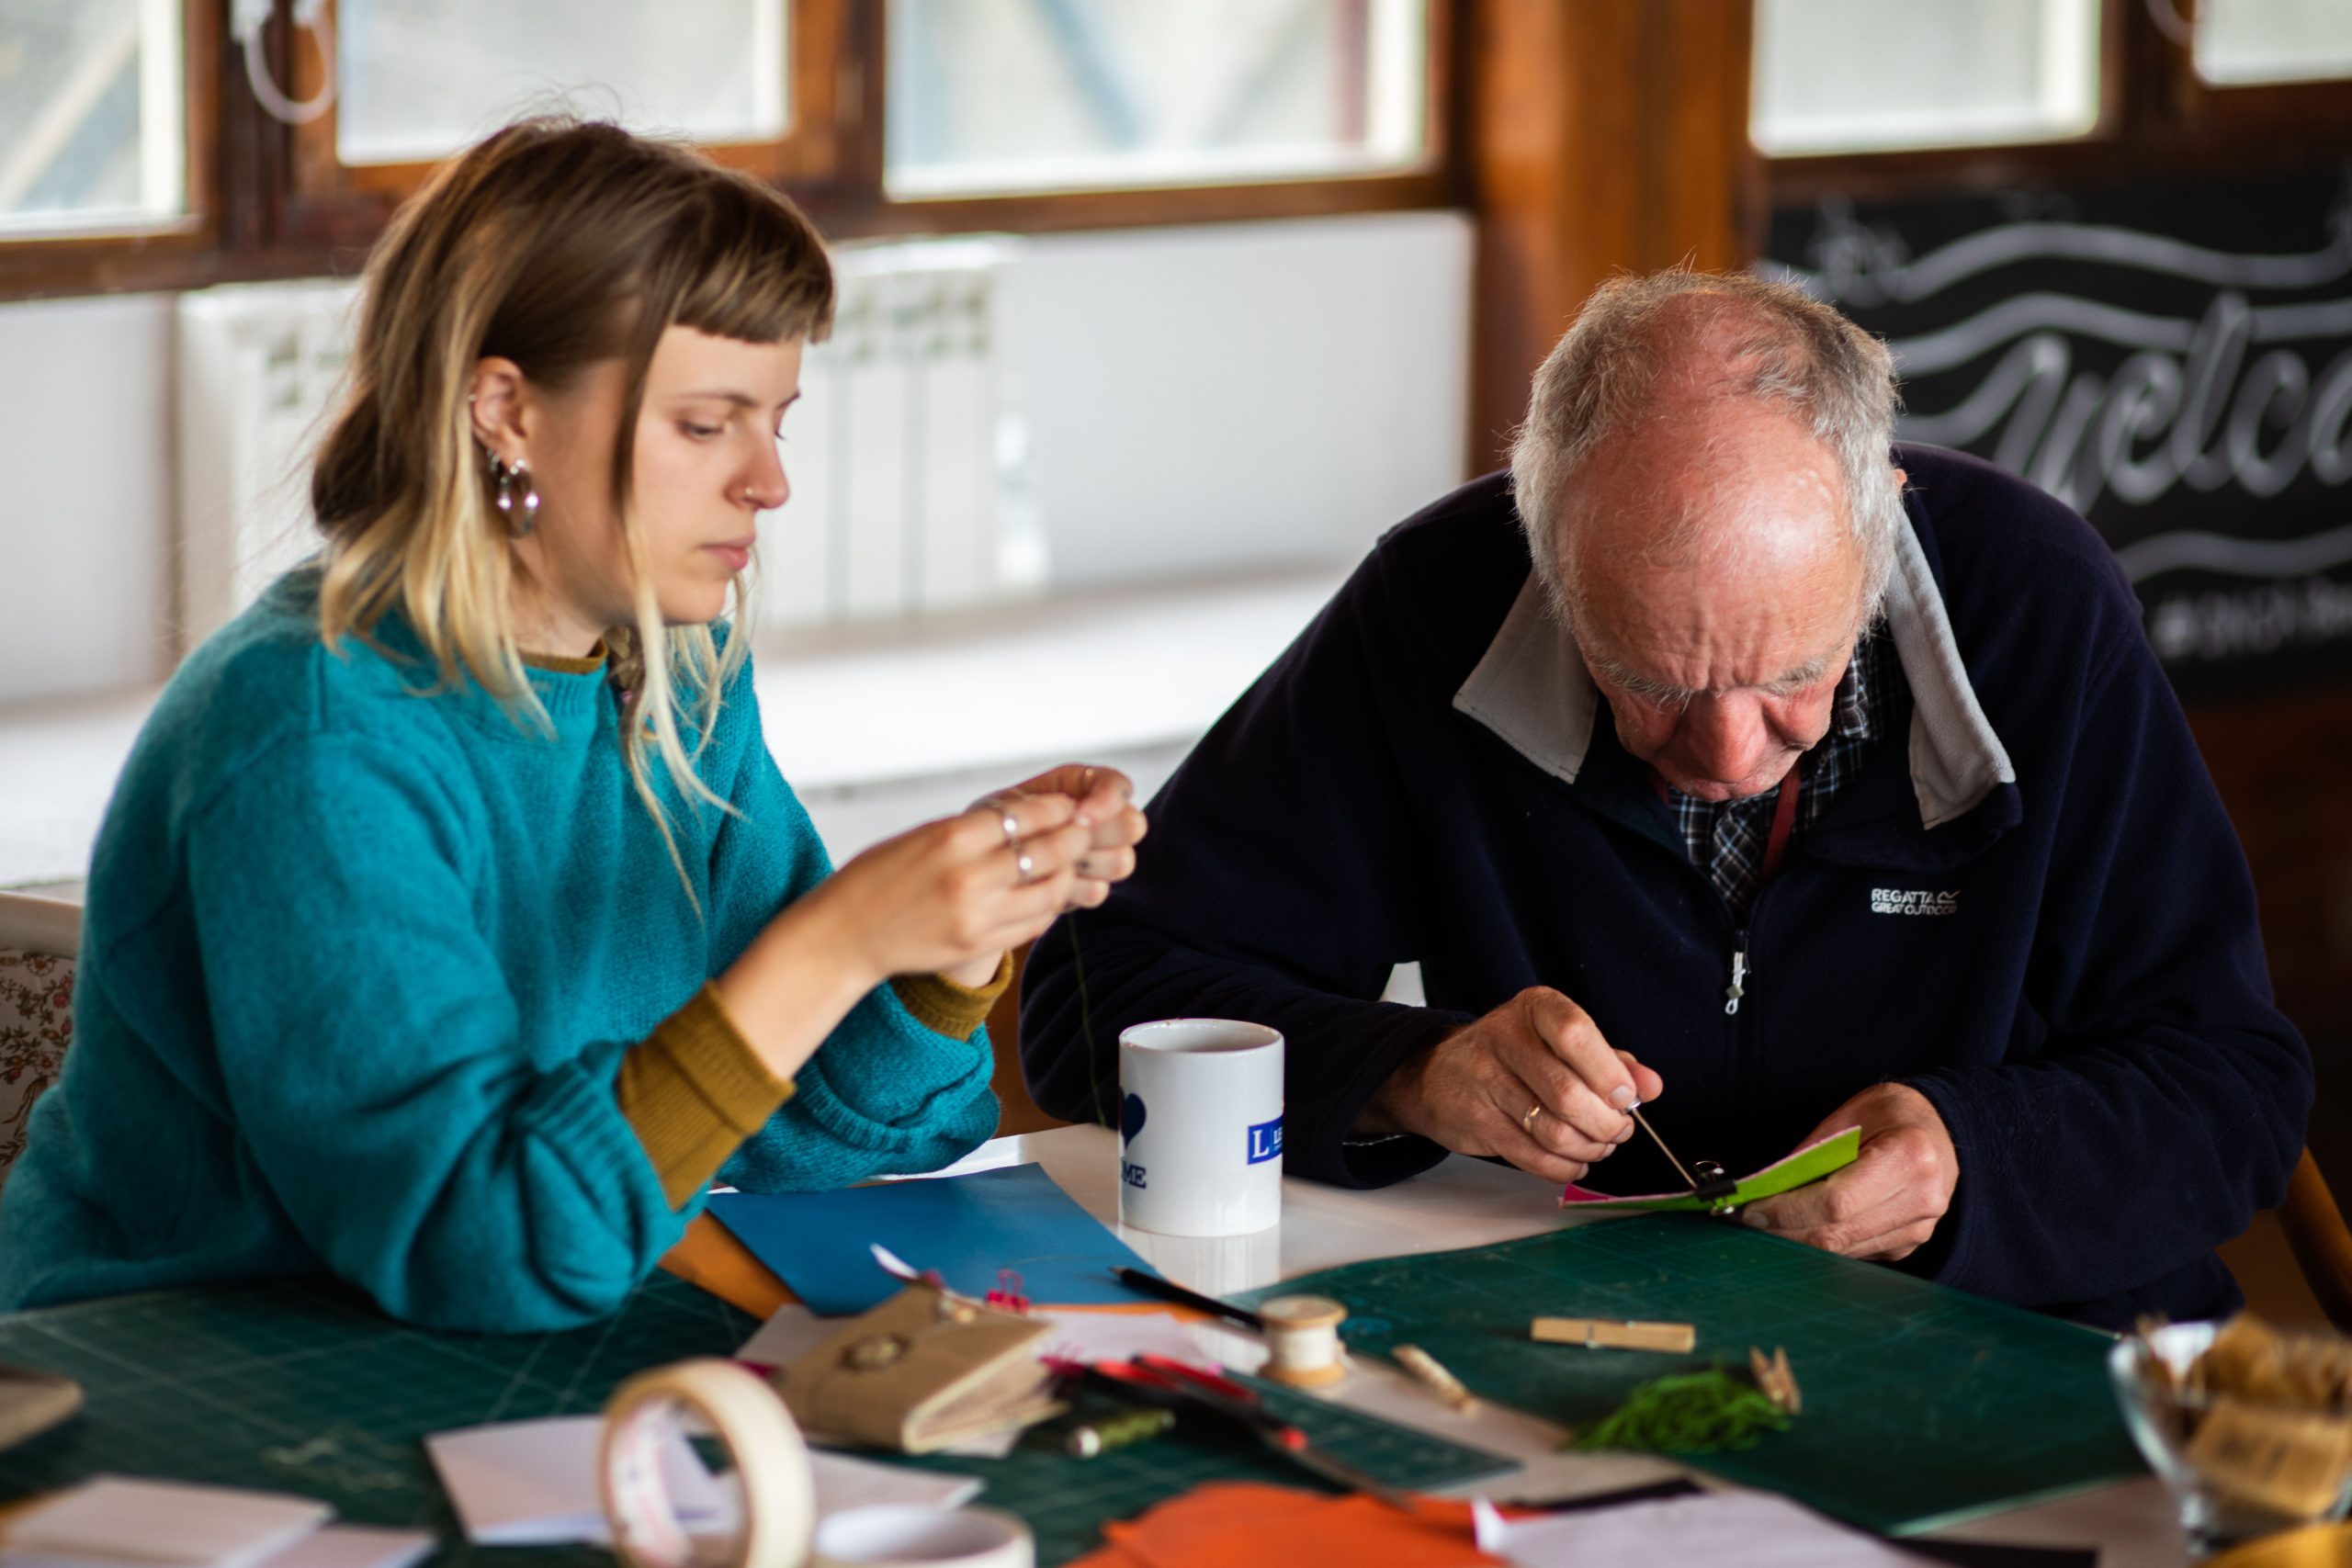 A photograph by Phoebe Wingrove of ONCA's community artist and a local person making books together at community afternoon.